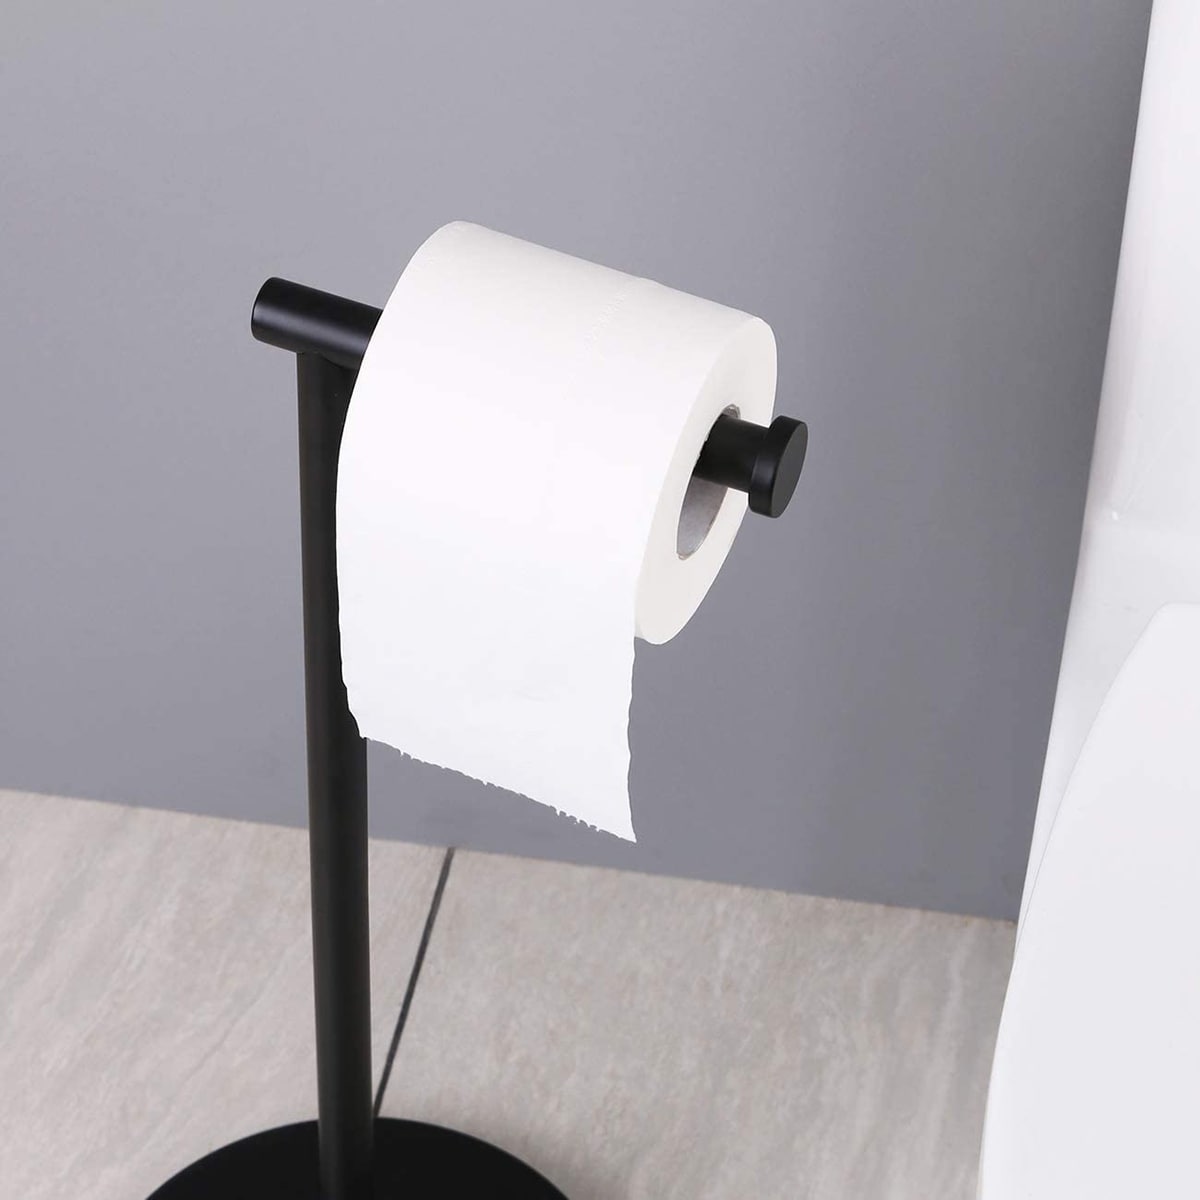 https://ak1.ostkcdn.com/images/products/is/images/direct/2a48ef102e739f7ddc51344fb6a605e08188938d/Freestanding-Toilet-Paper-Holder.jpg